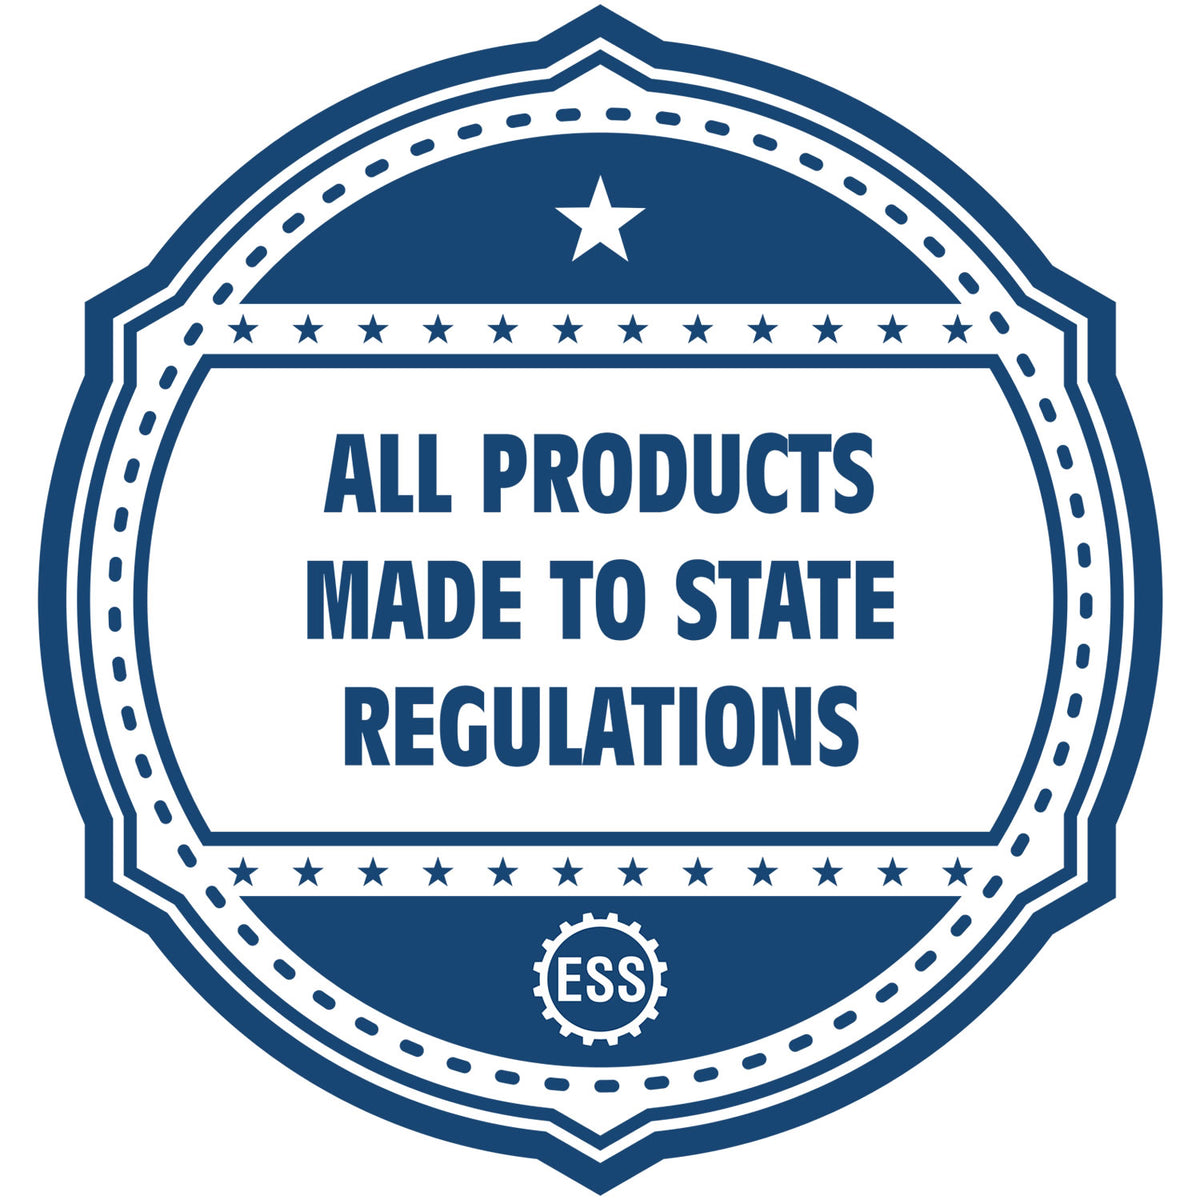 An icon or badge element for the Handheld Kansas Professional Engineer Embosser showing that this product is made in compliance with state regulations.